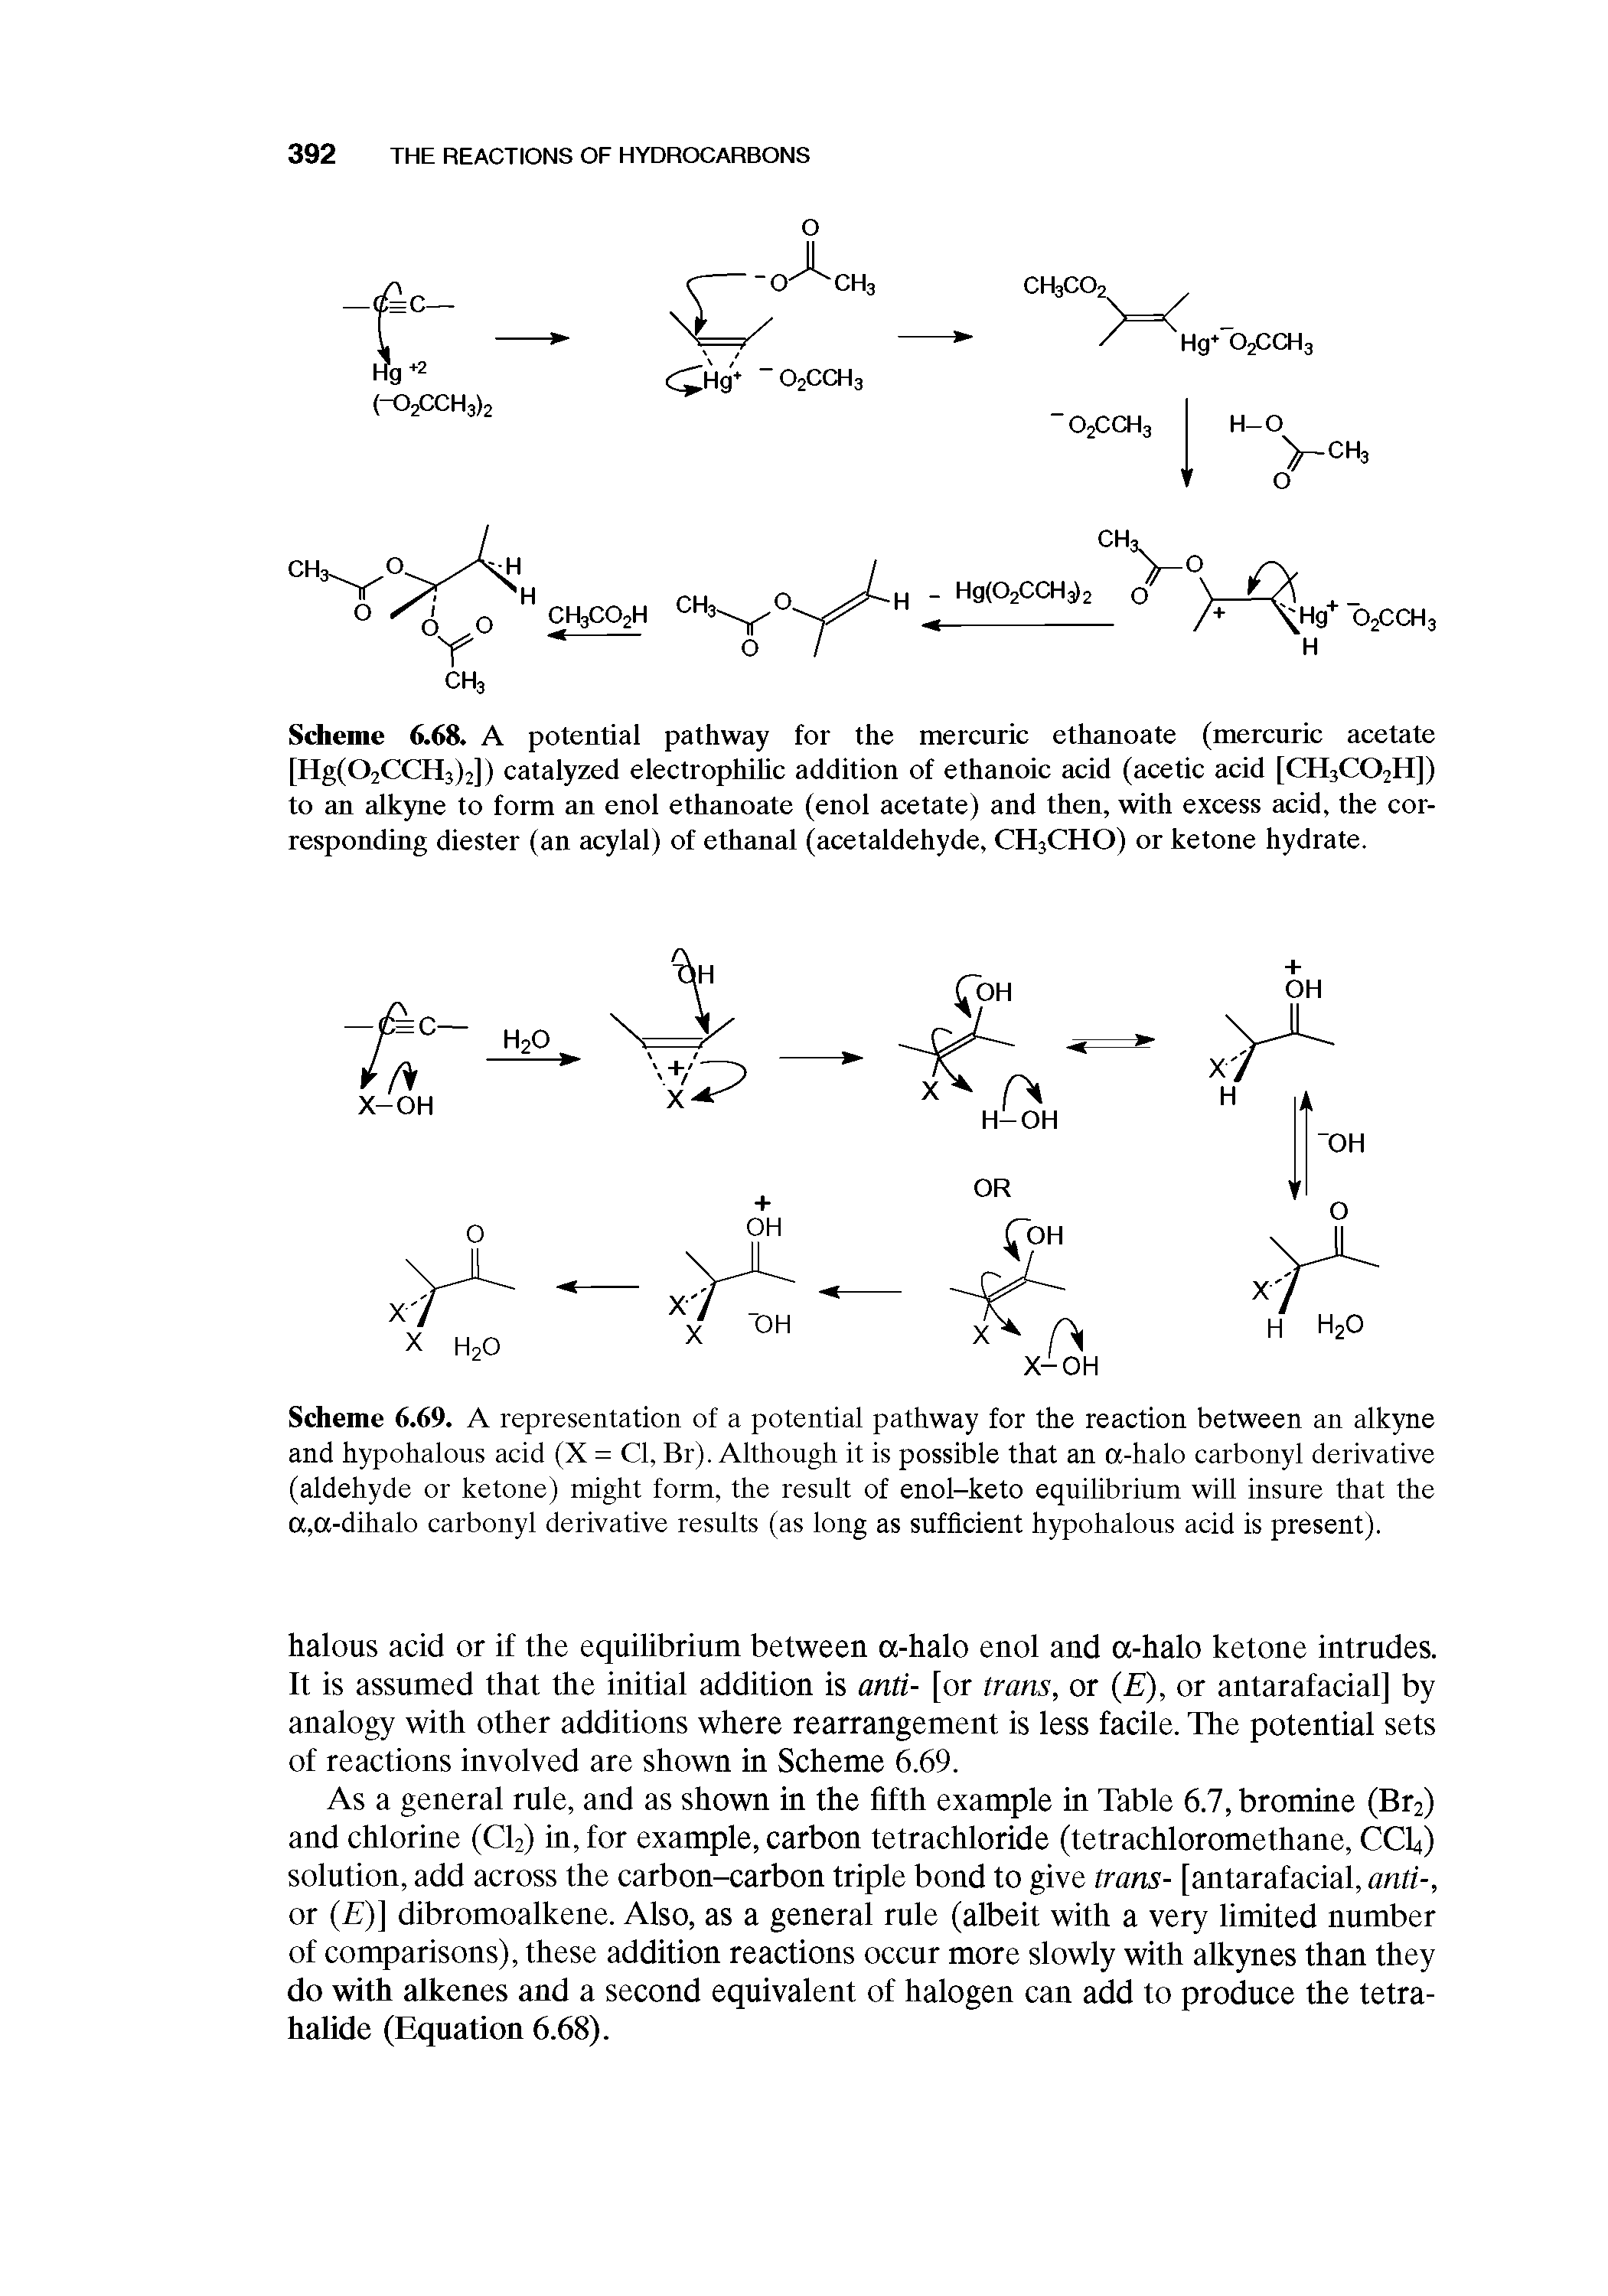 Scheme 6.68. A potential pathway for the mercuric ethanoate (mercuric acetate [Hg(02CCH3)2]) catalyzed electrophilic addition of ethanoic acid (acetic acid [CH3CO2H]) to an alkyne to form an enol ethanoate (enol acetate) and then, with excess acid, the corresponding diester (an acylal) of ethanal (acetaldehyde, CH3CHO) or ketone hydrate.